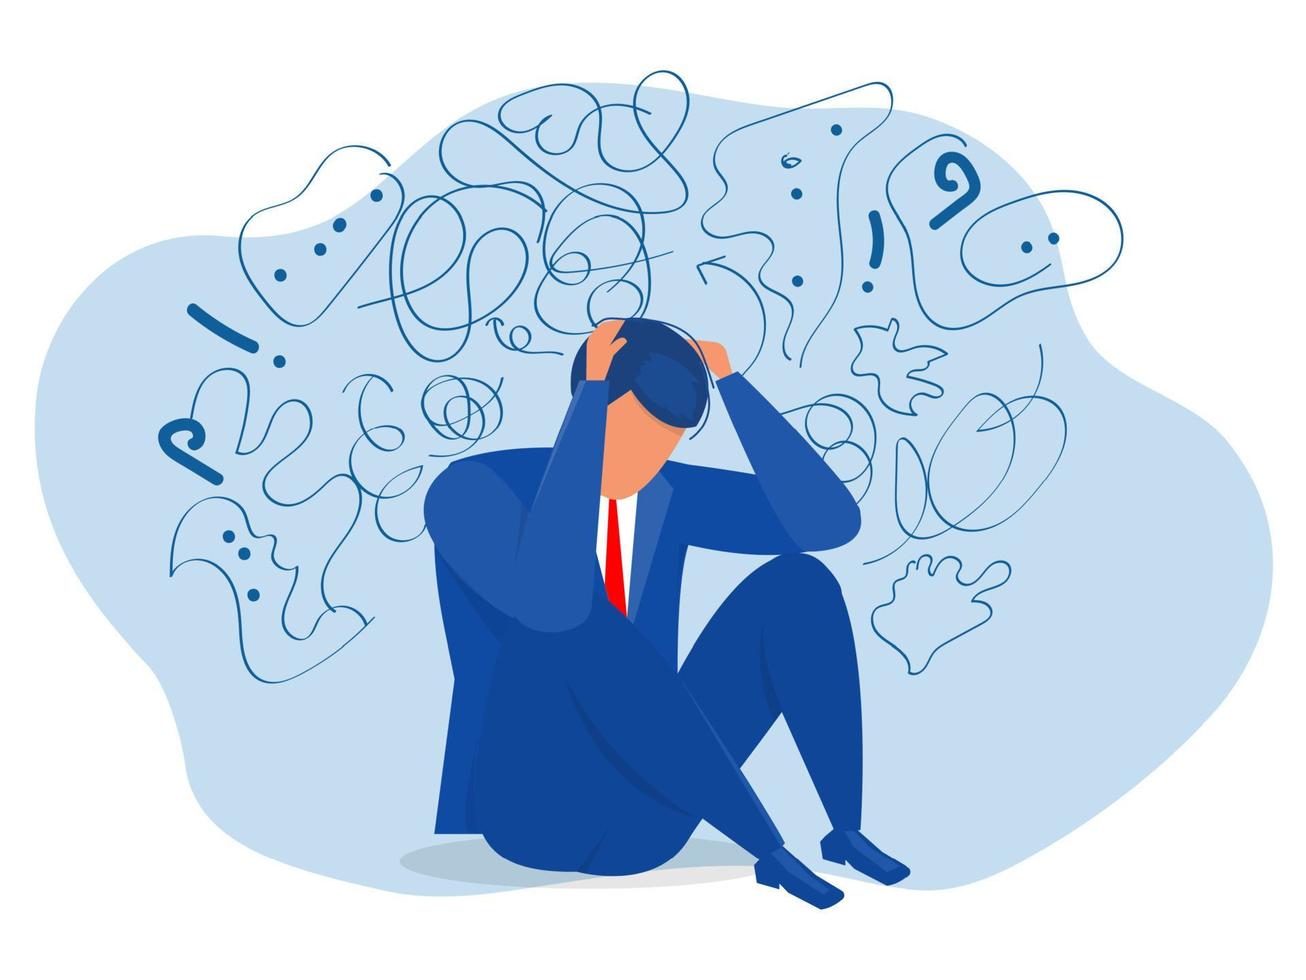 man suffers from obsessive thoughts headache unresolved issues psychological trauma depression.Mental stress panic mind disorder illustration Flat vector illustration.